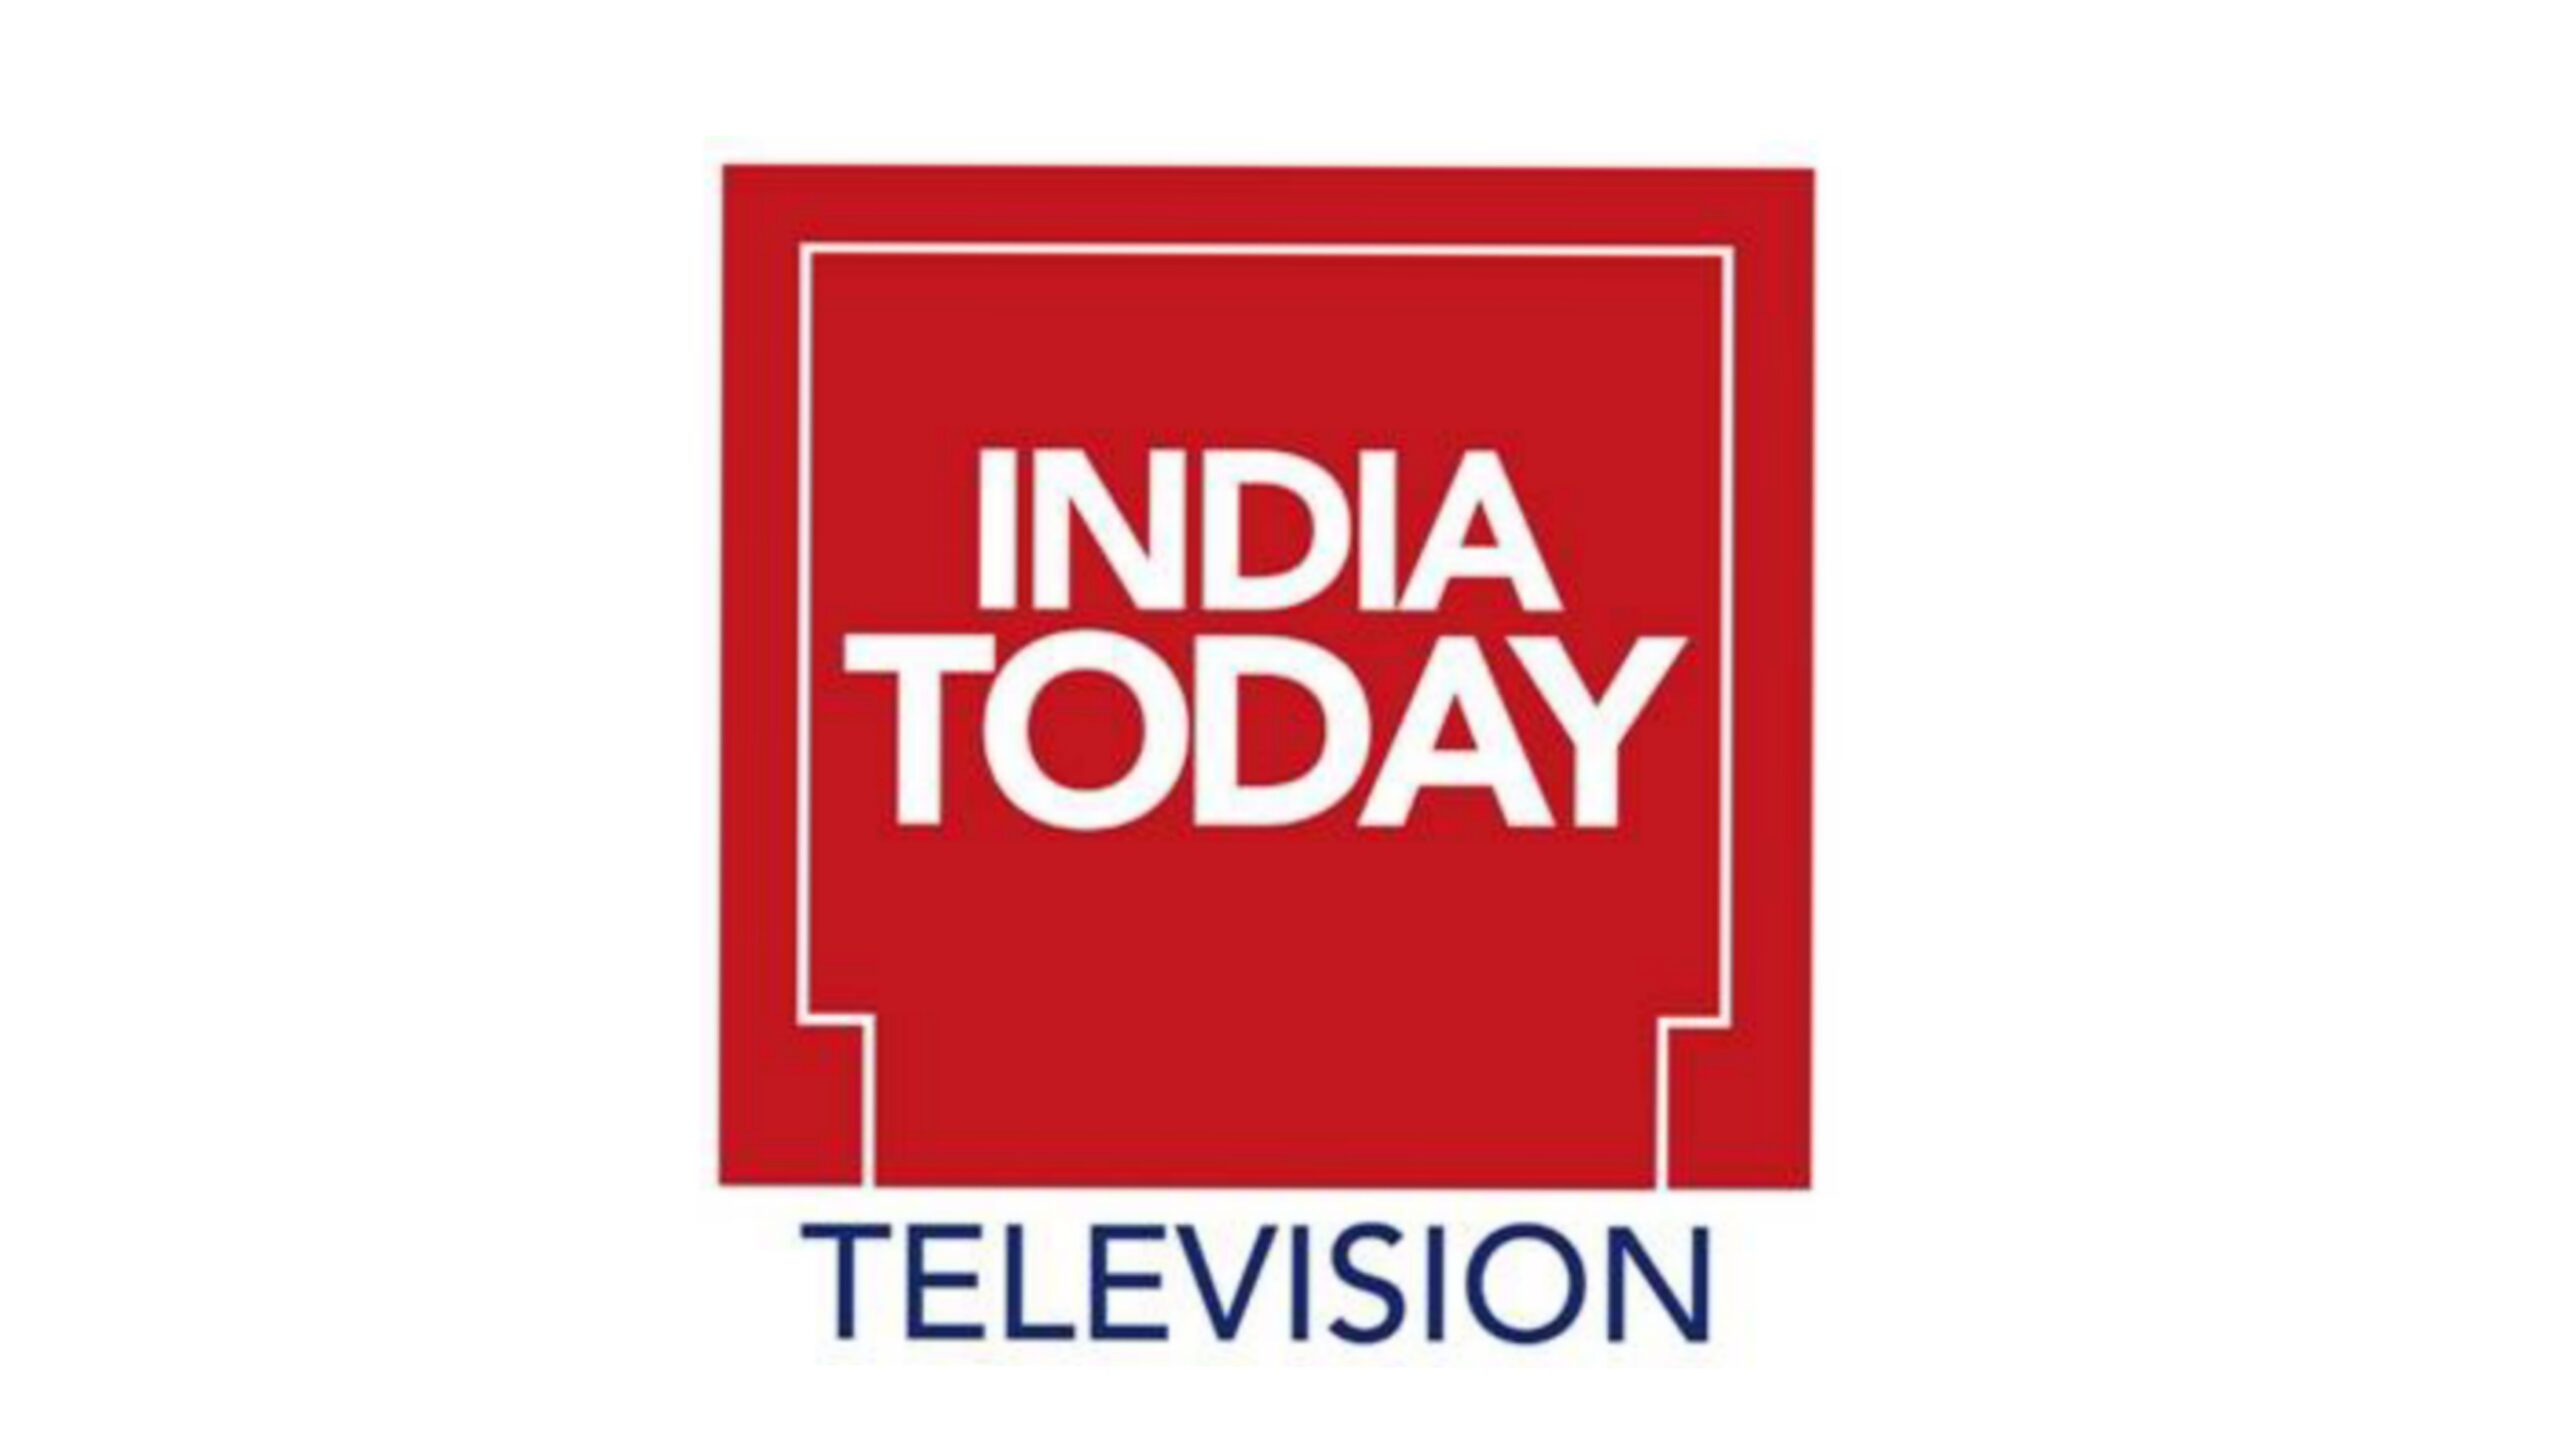 India Today Off Campus Drive |Software Engineer |Apply here!!